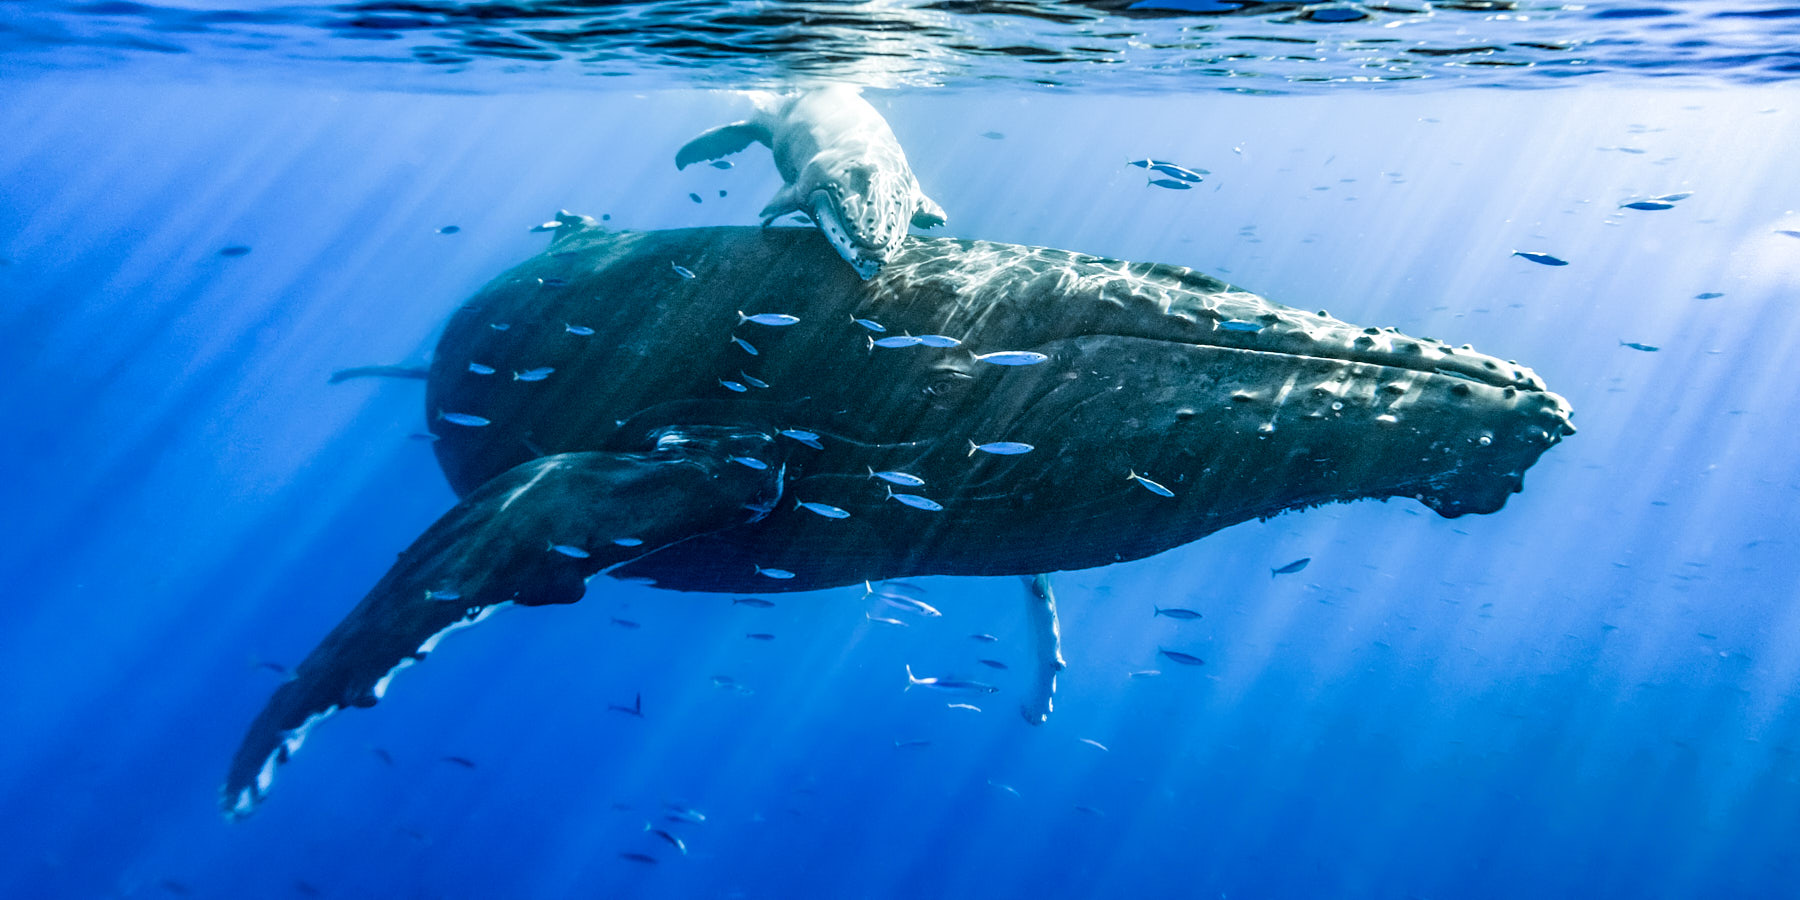 panorama underwater mother and calf humpback whale encounter and my very first time seeing whales underwater